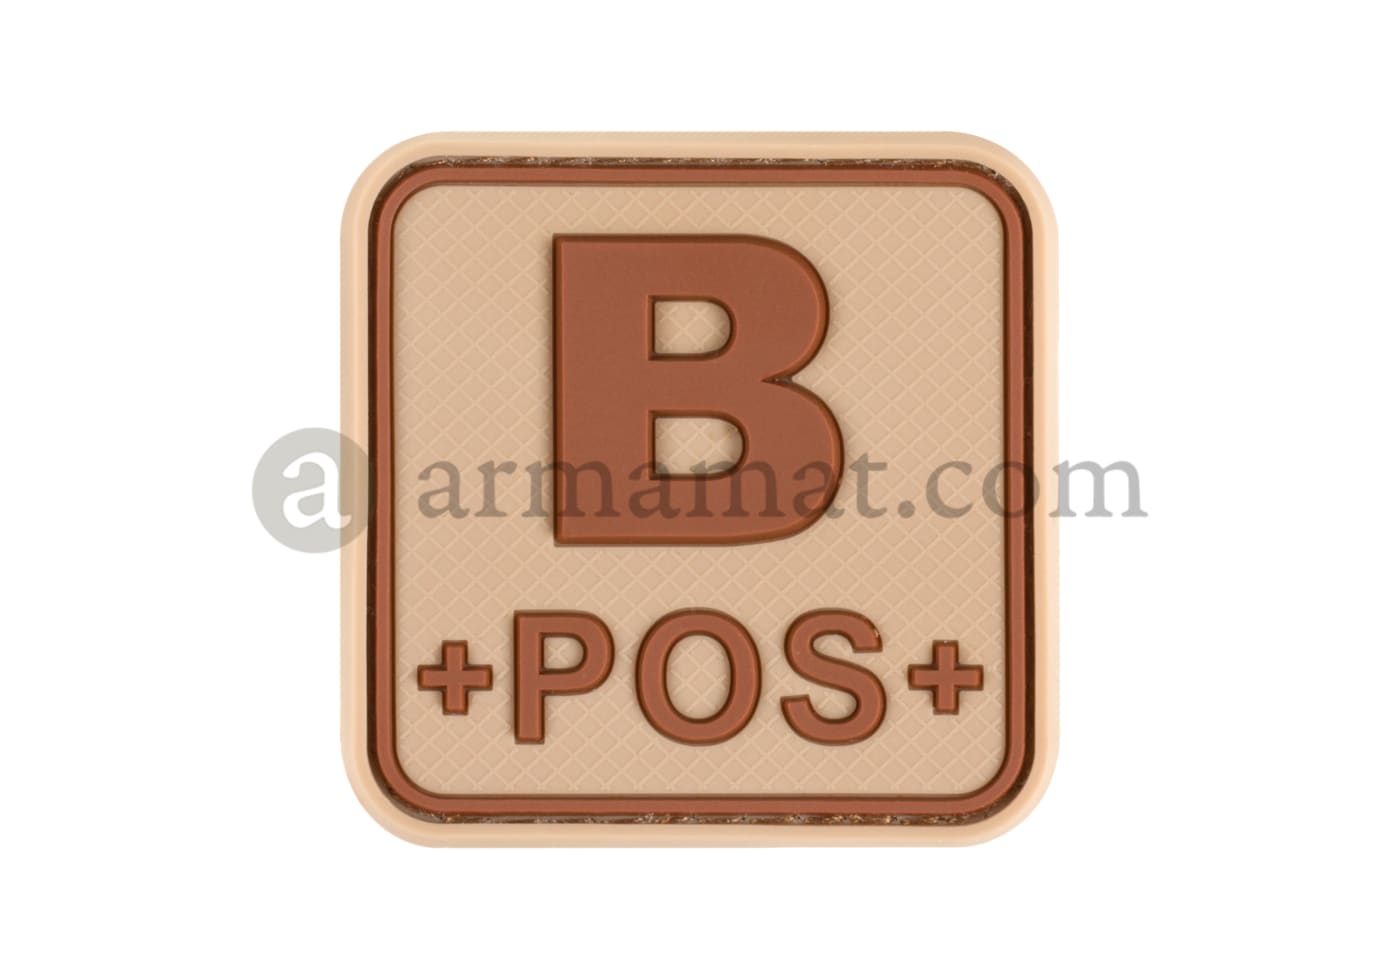 JTG Bloodtype Square Rubber Patch B Pos